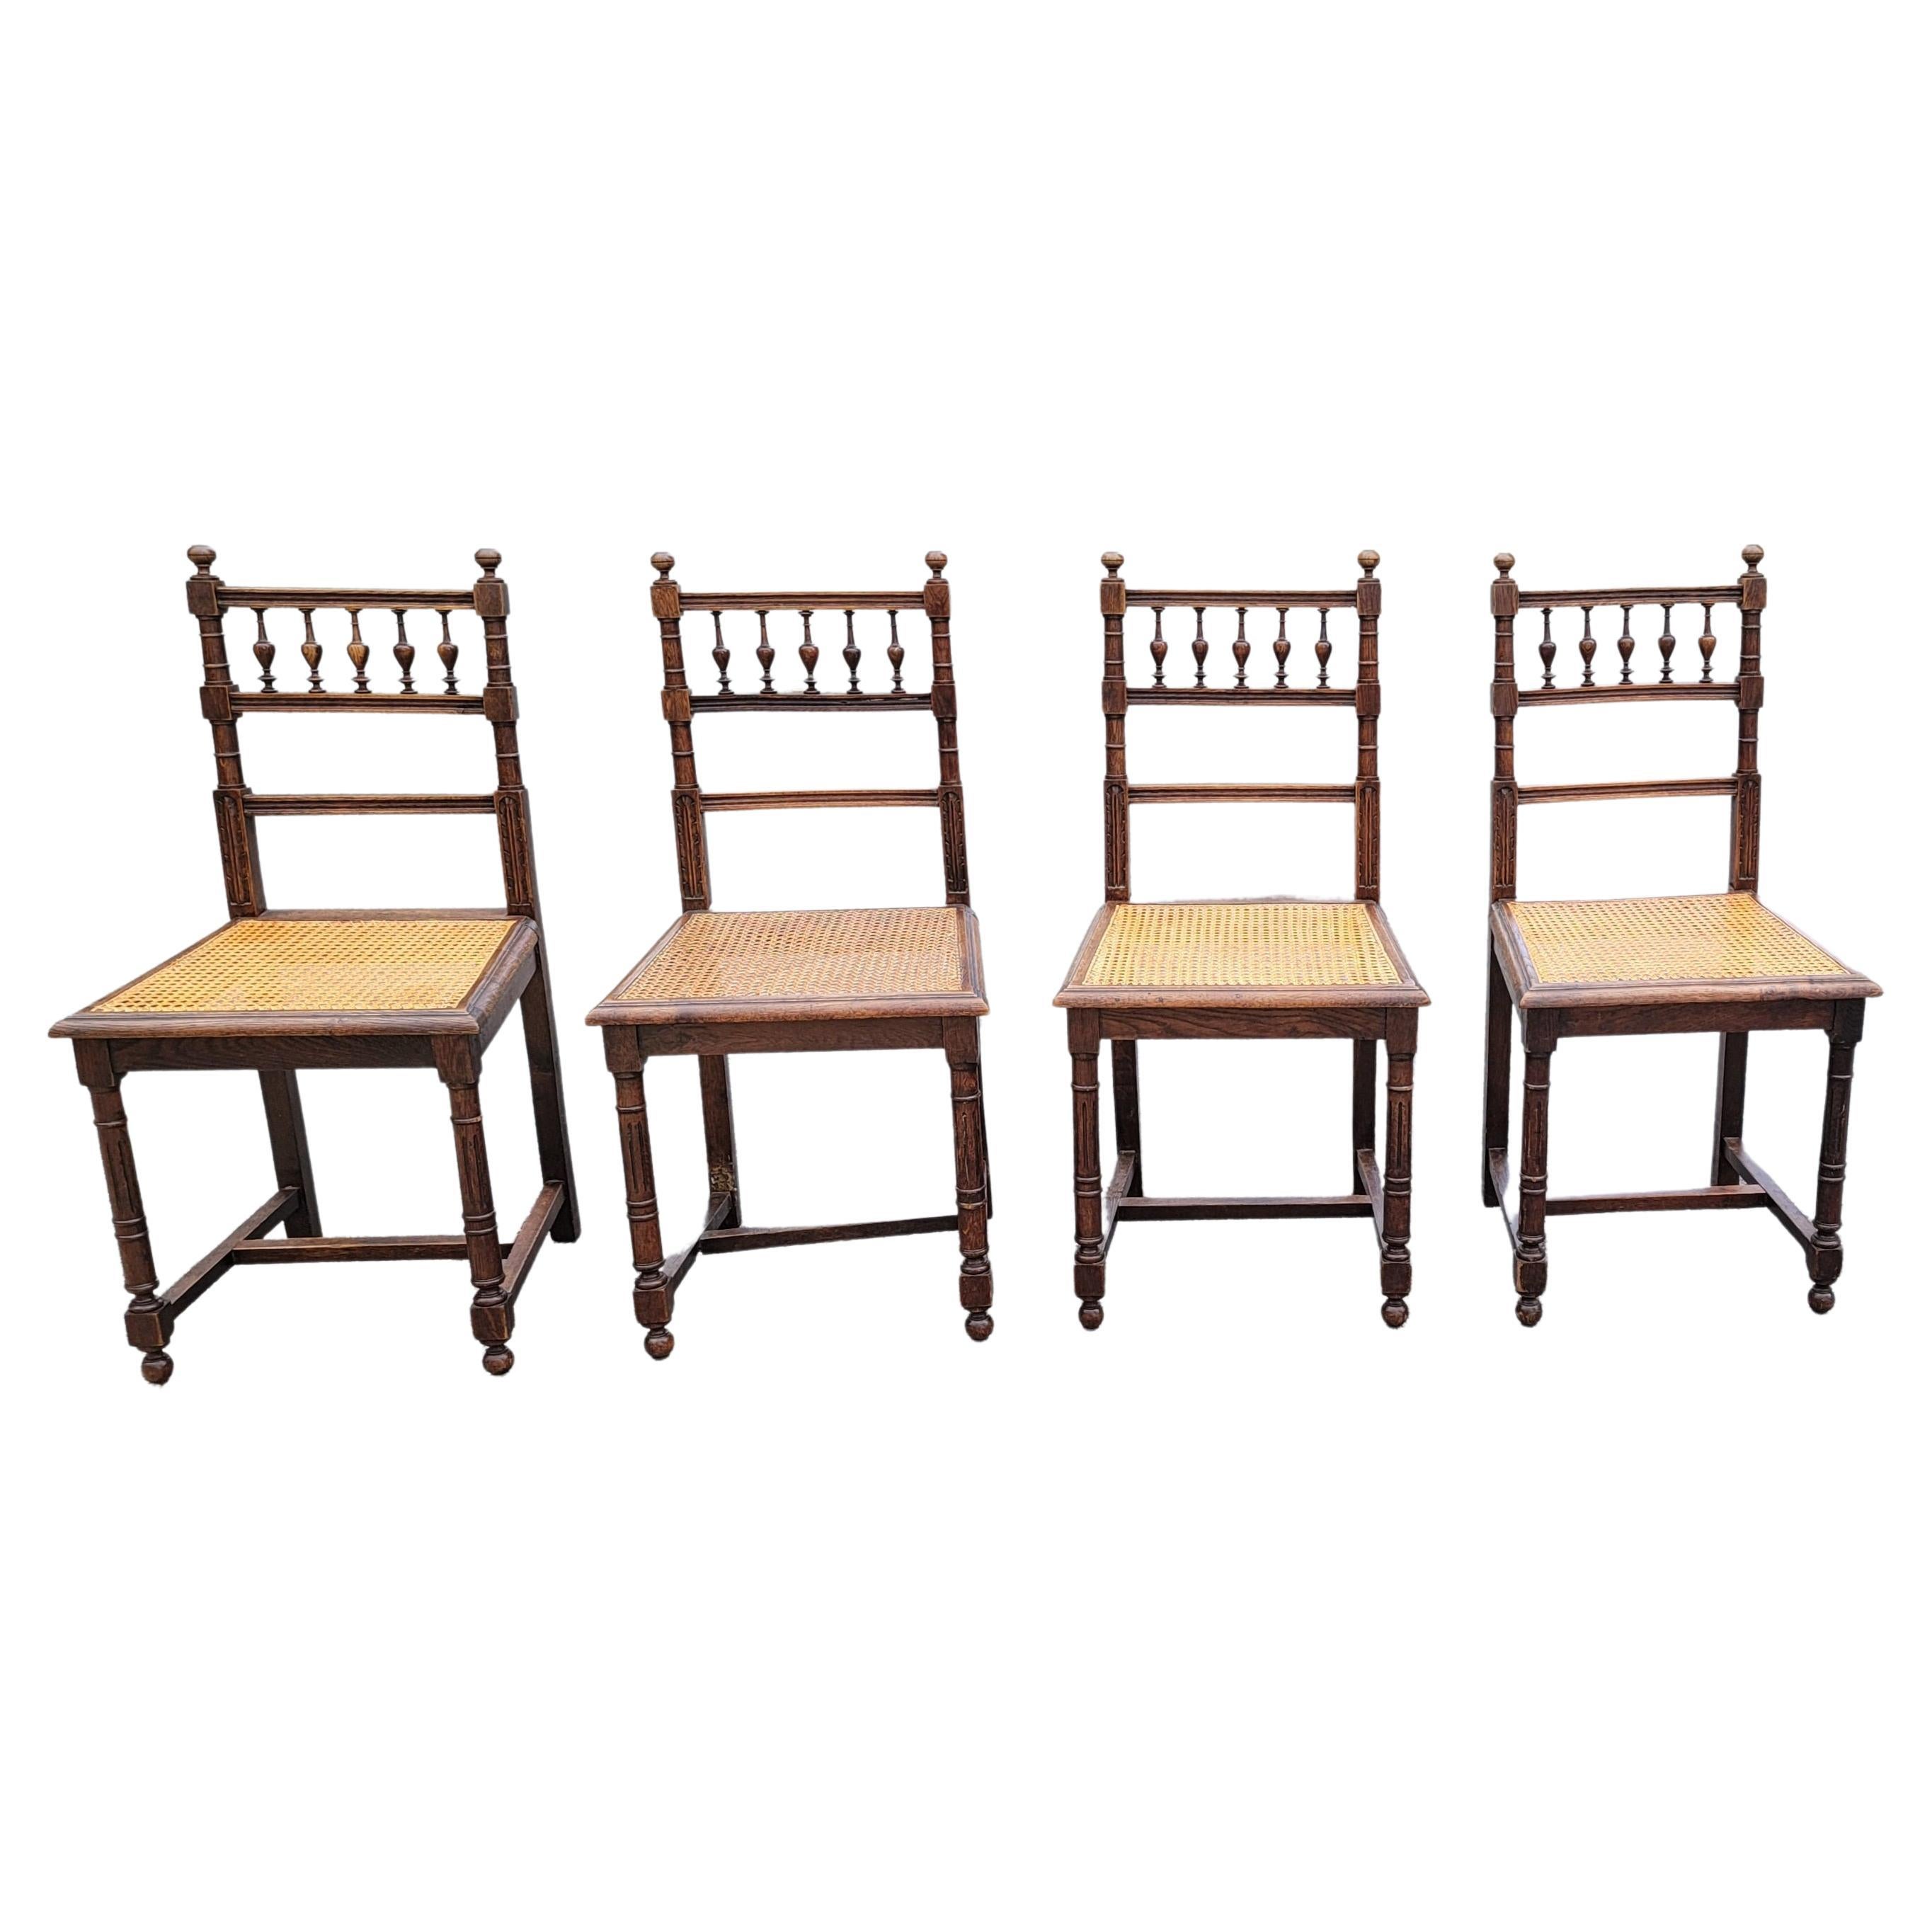 American Set of 5 Early 20th C. French Henry II Oak and Canned Seat Dining Chairs For Sale